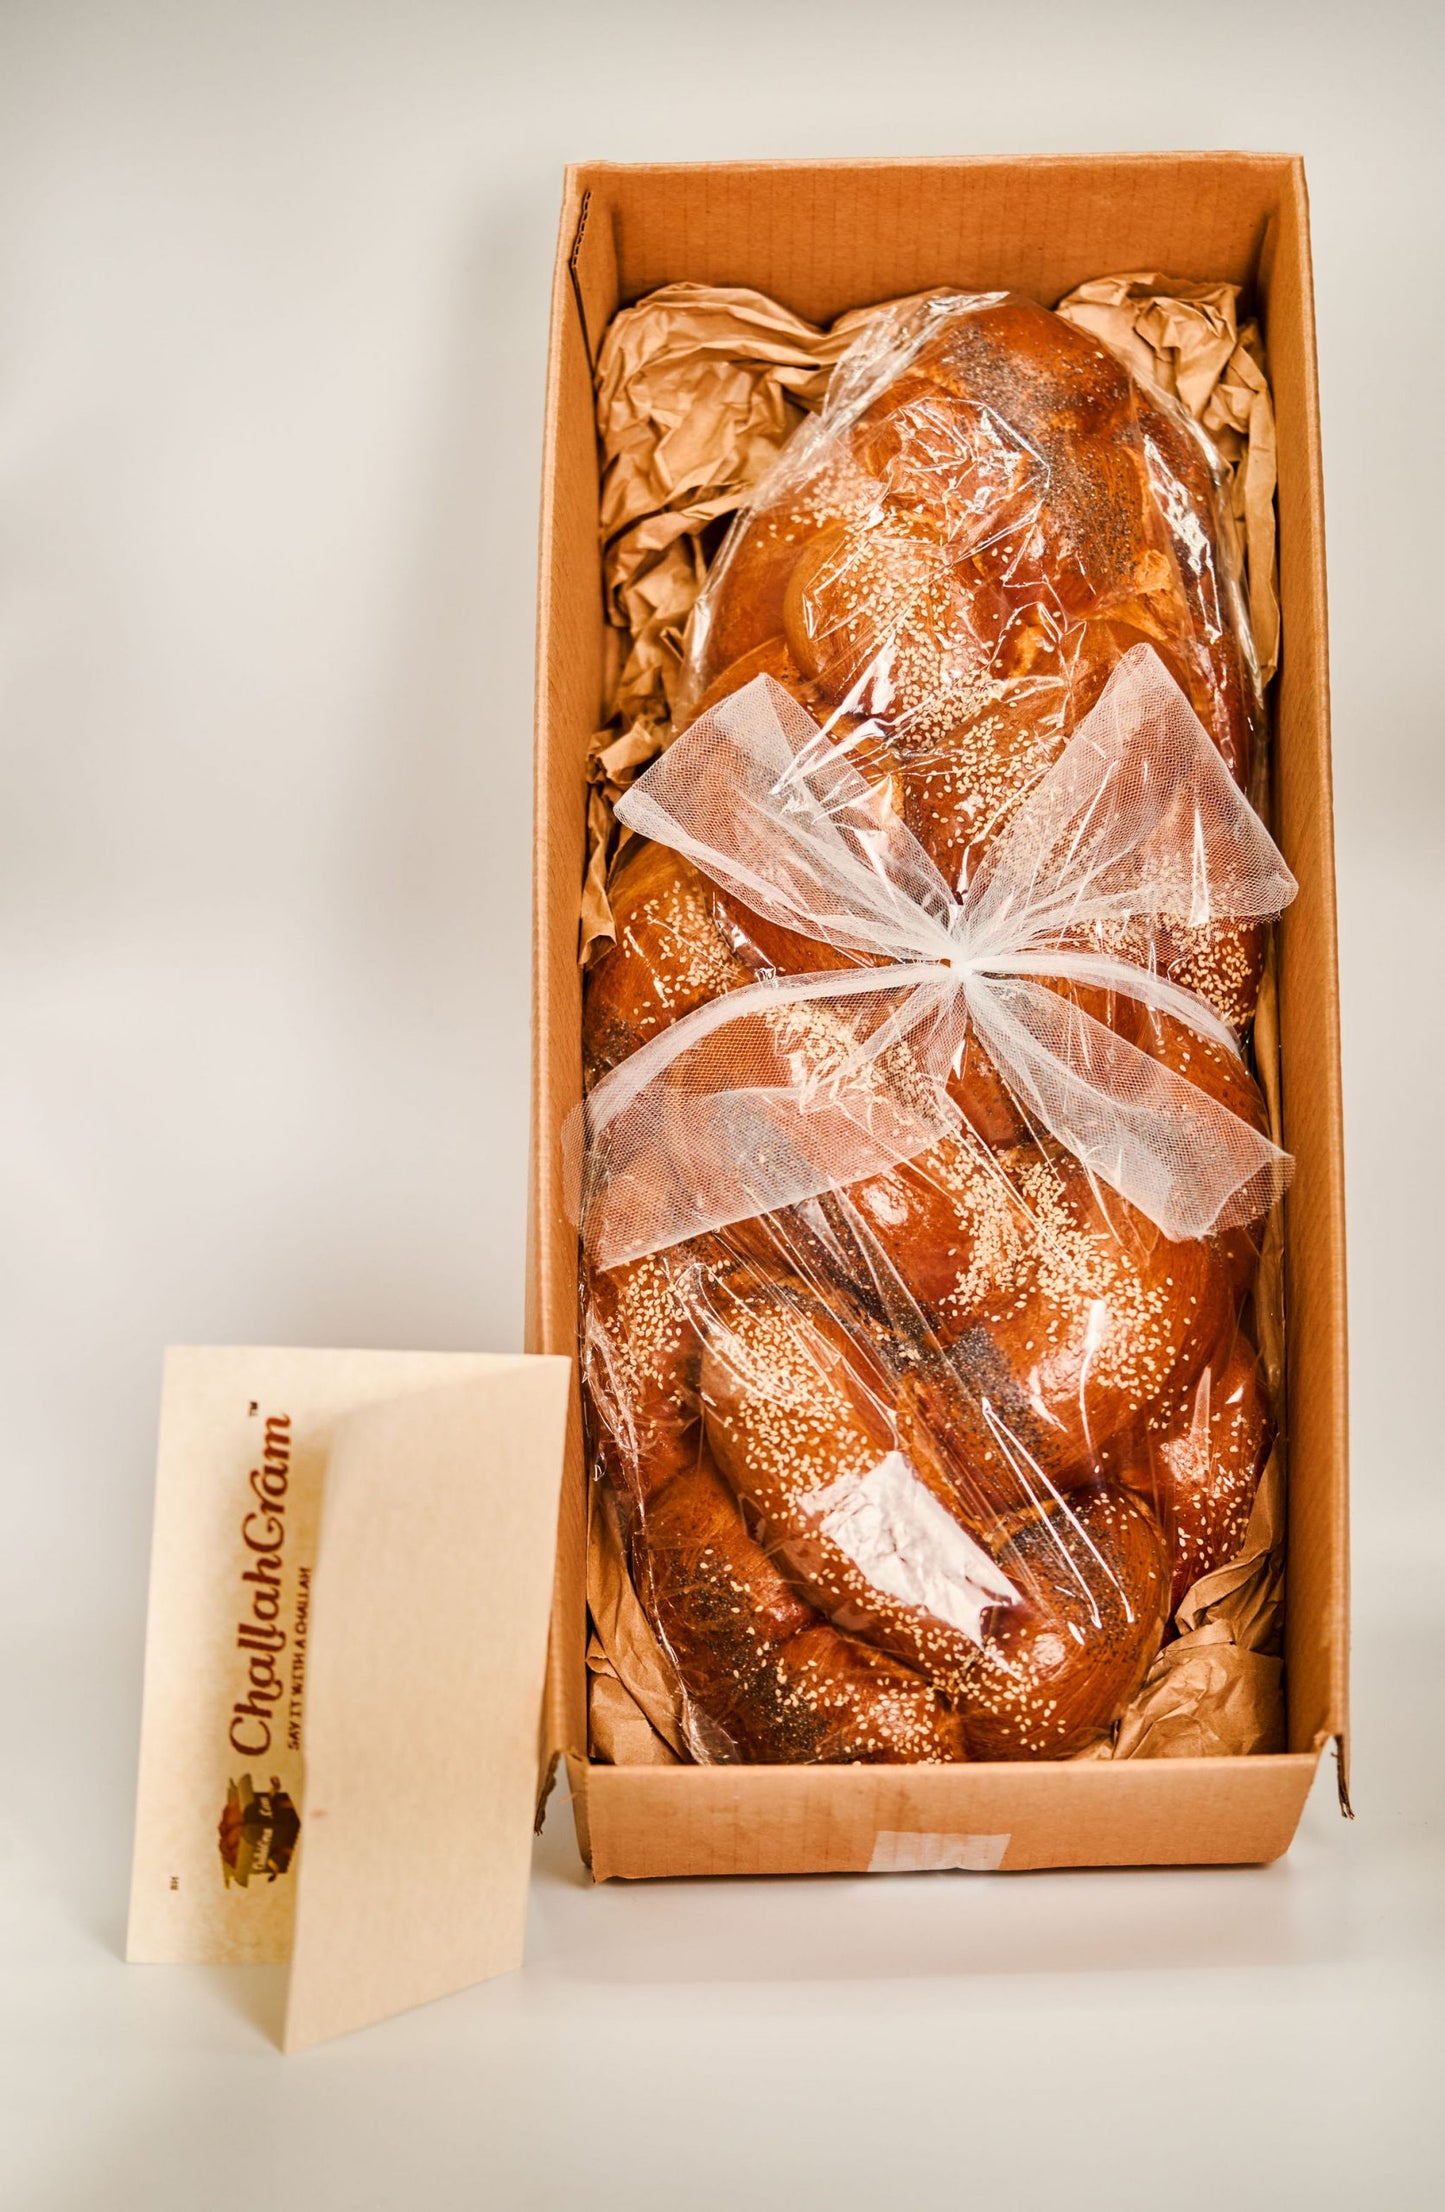 3lb - WOW Challah: An Exceptional & Unforgettable Gift